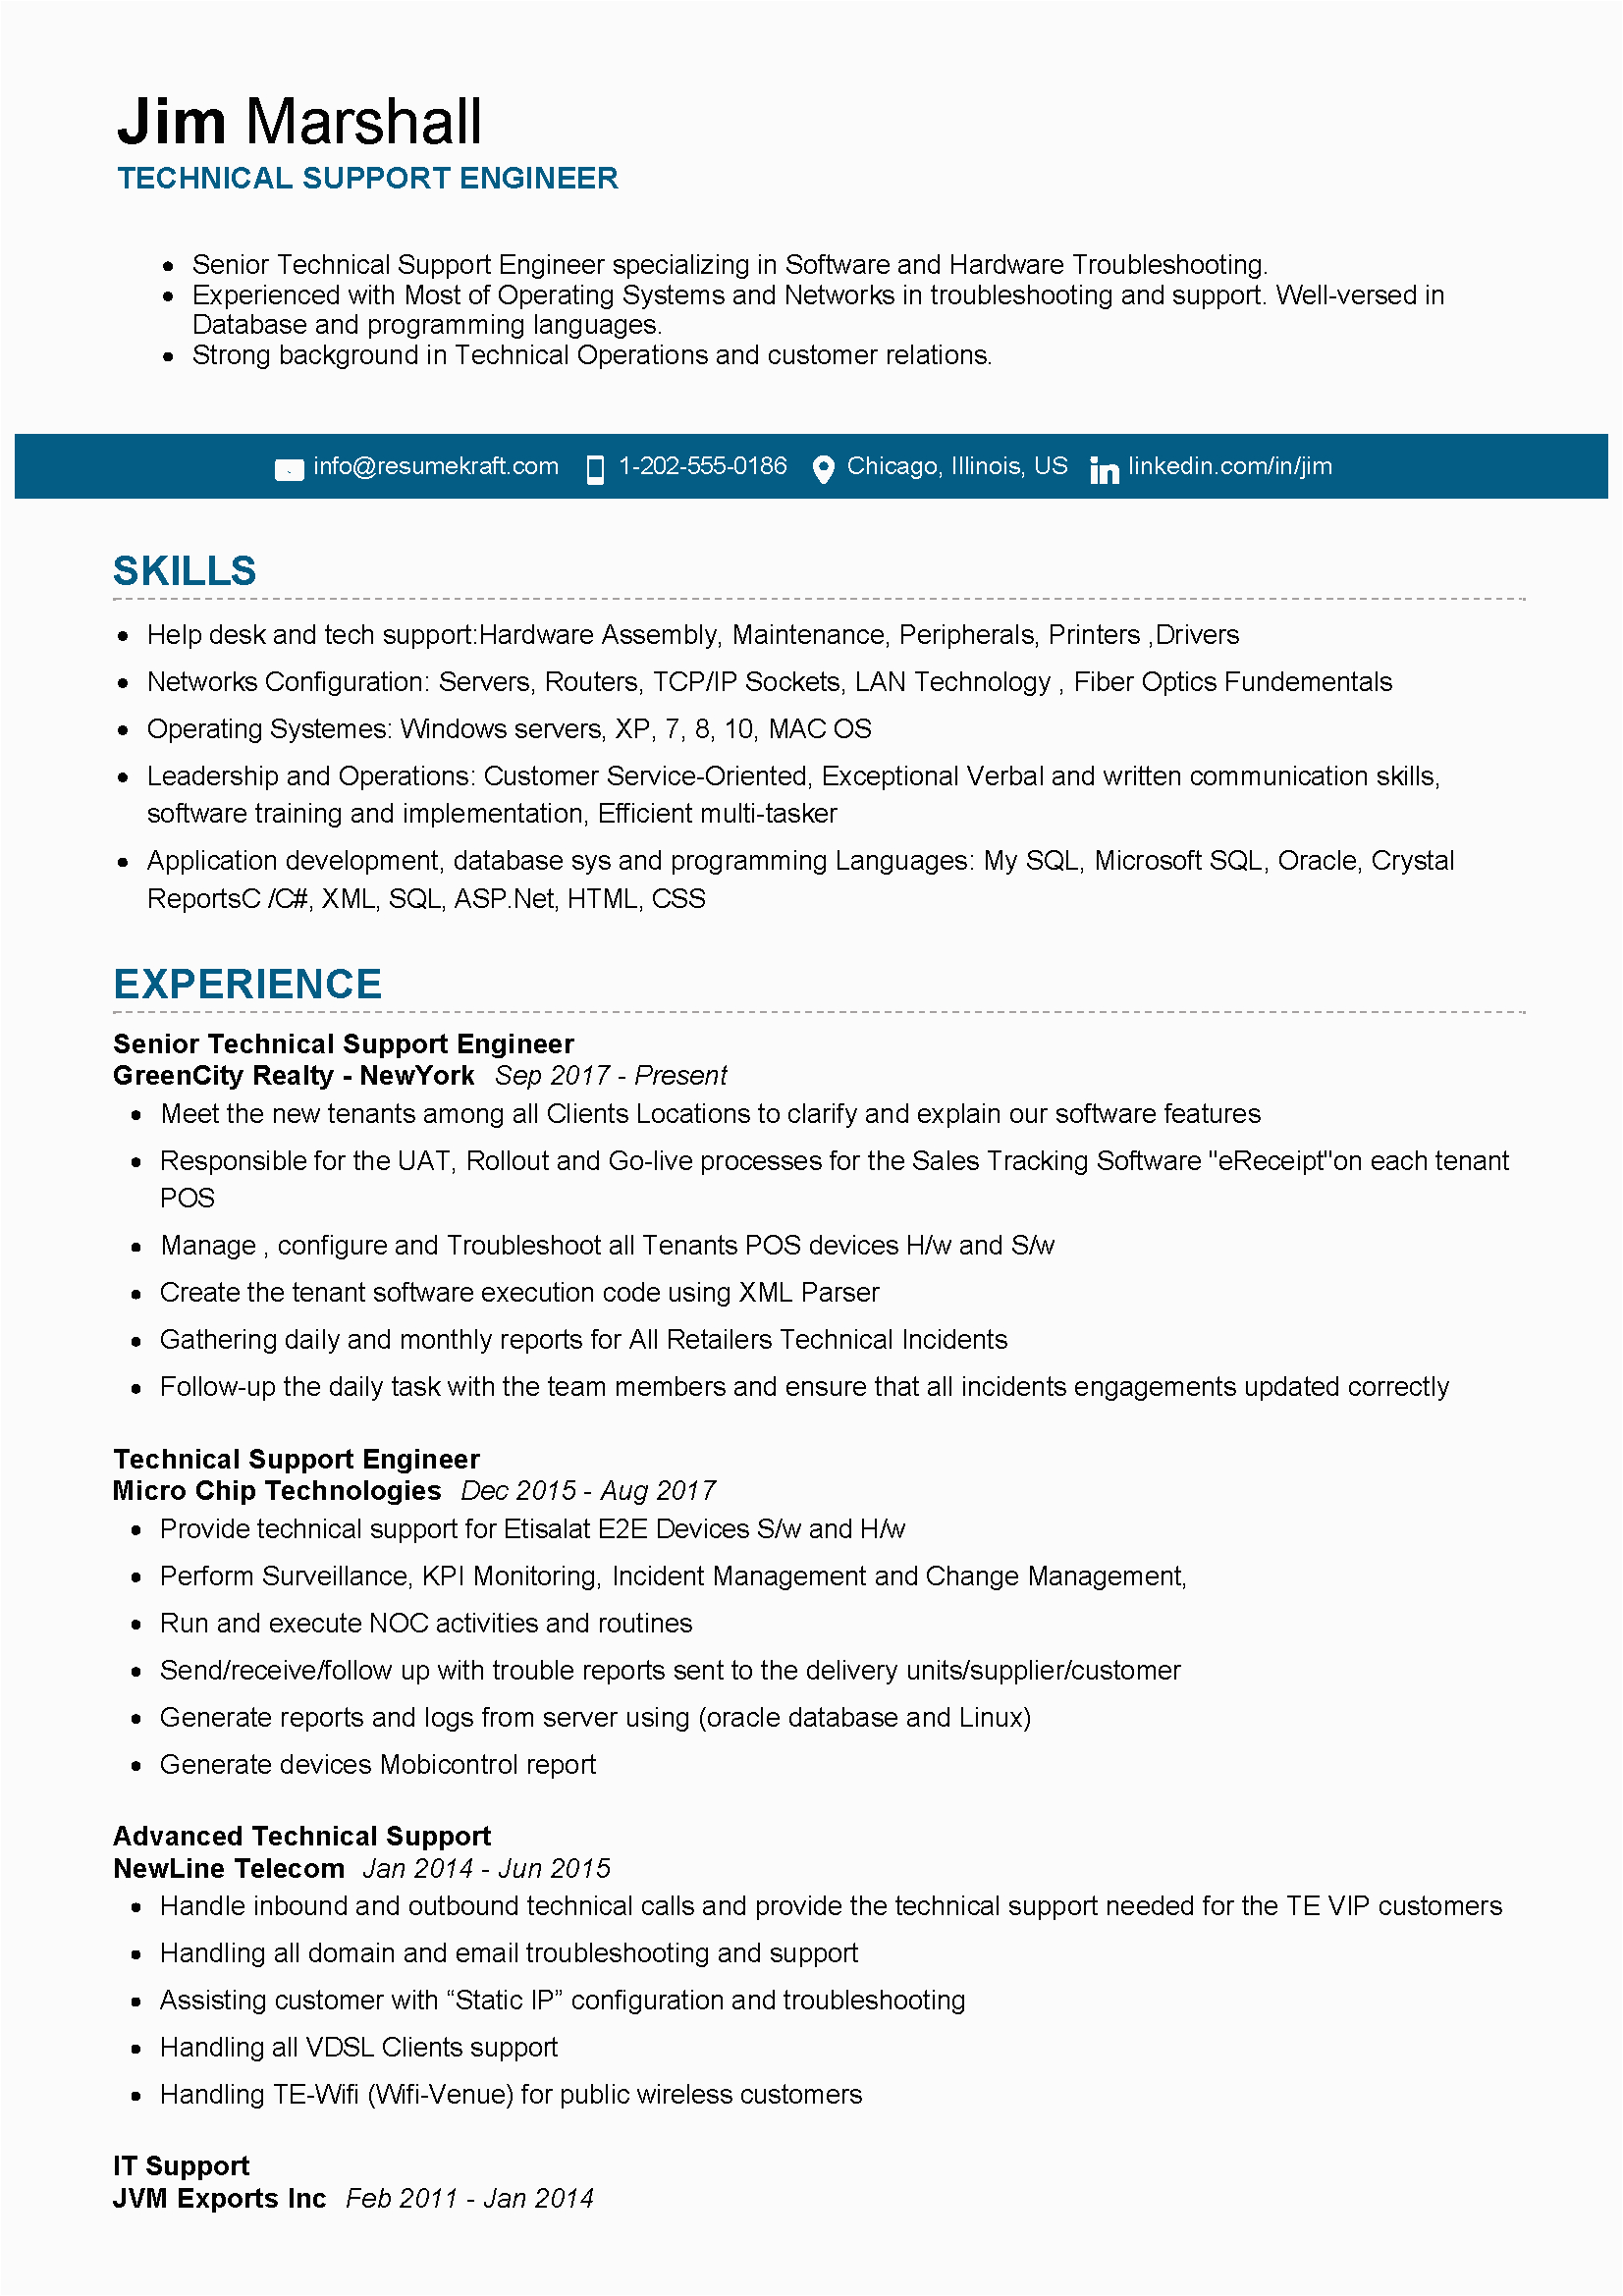 Resume Samples for A Tech Position Technical Support Engineer Resume Sample 2022